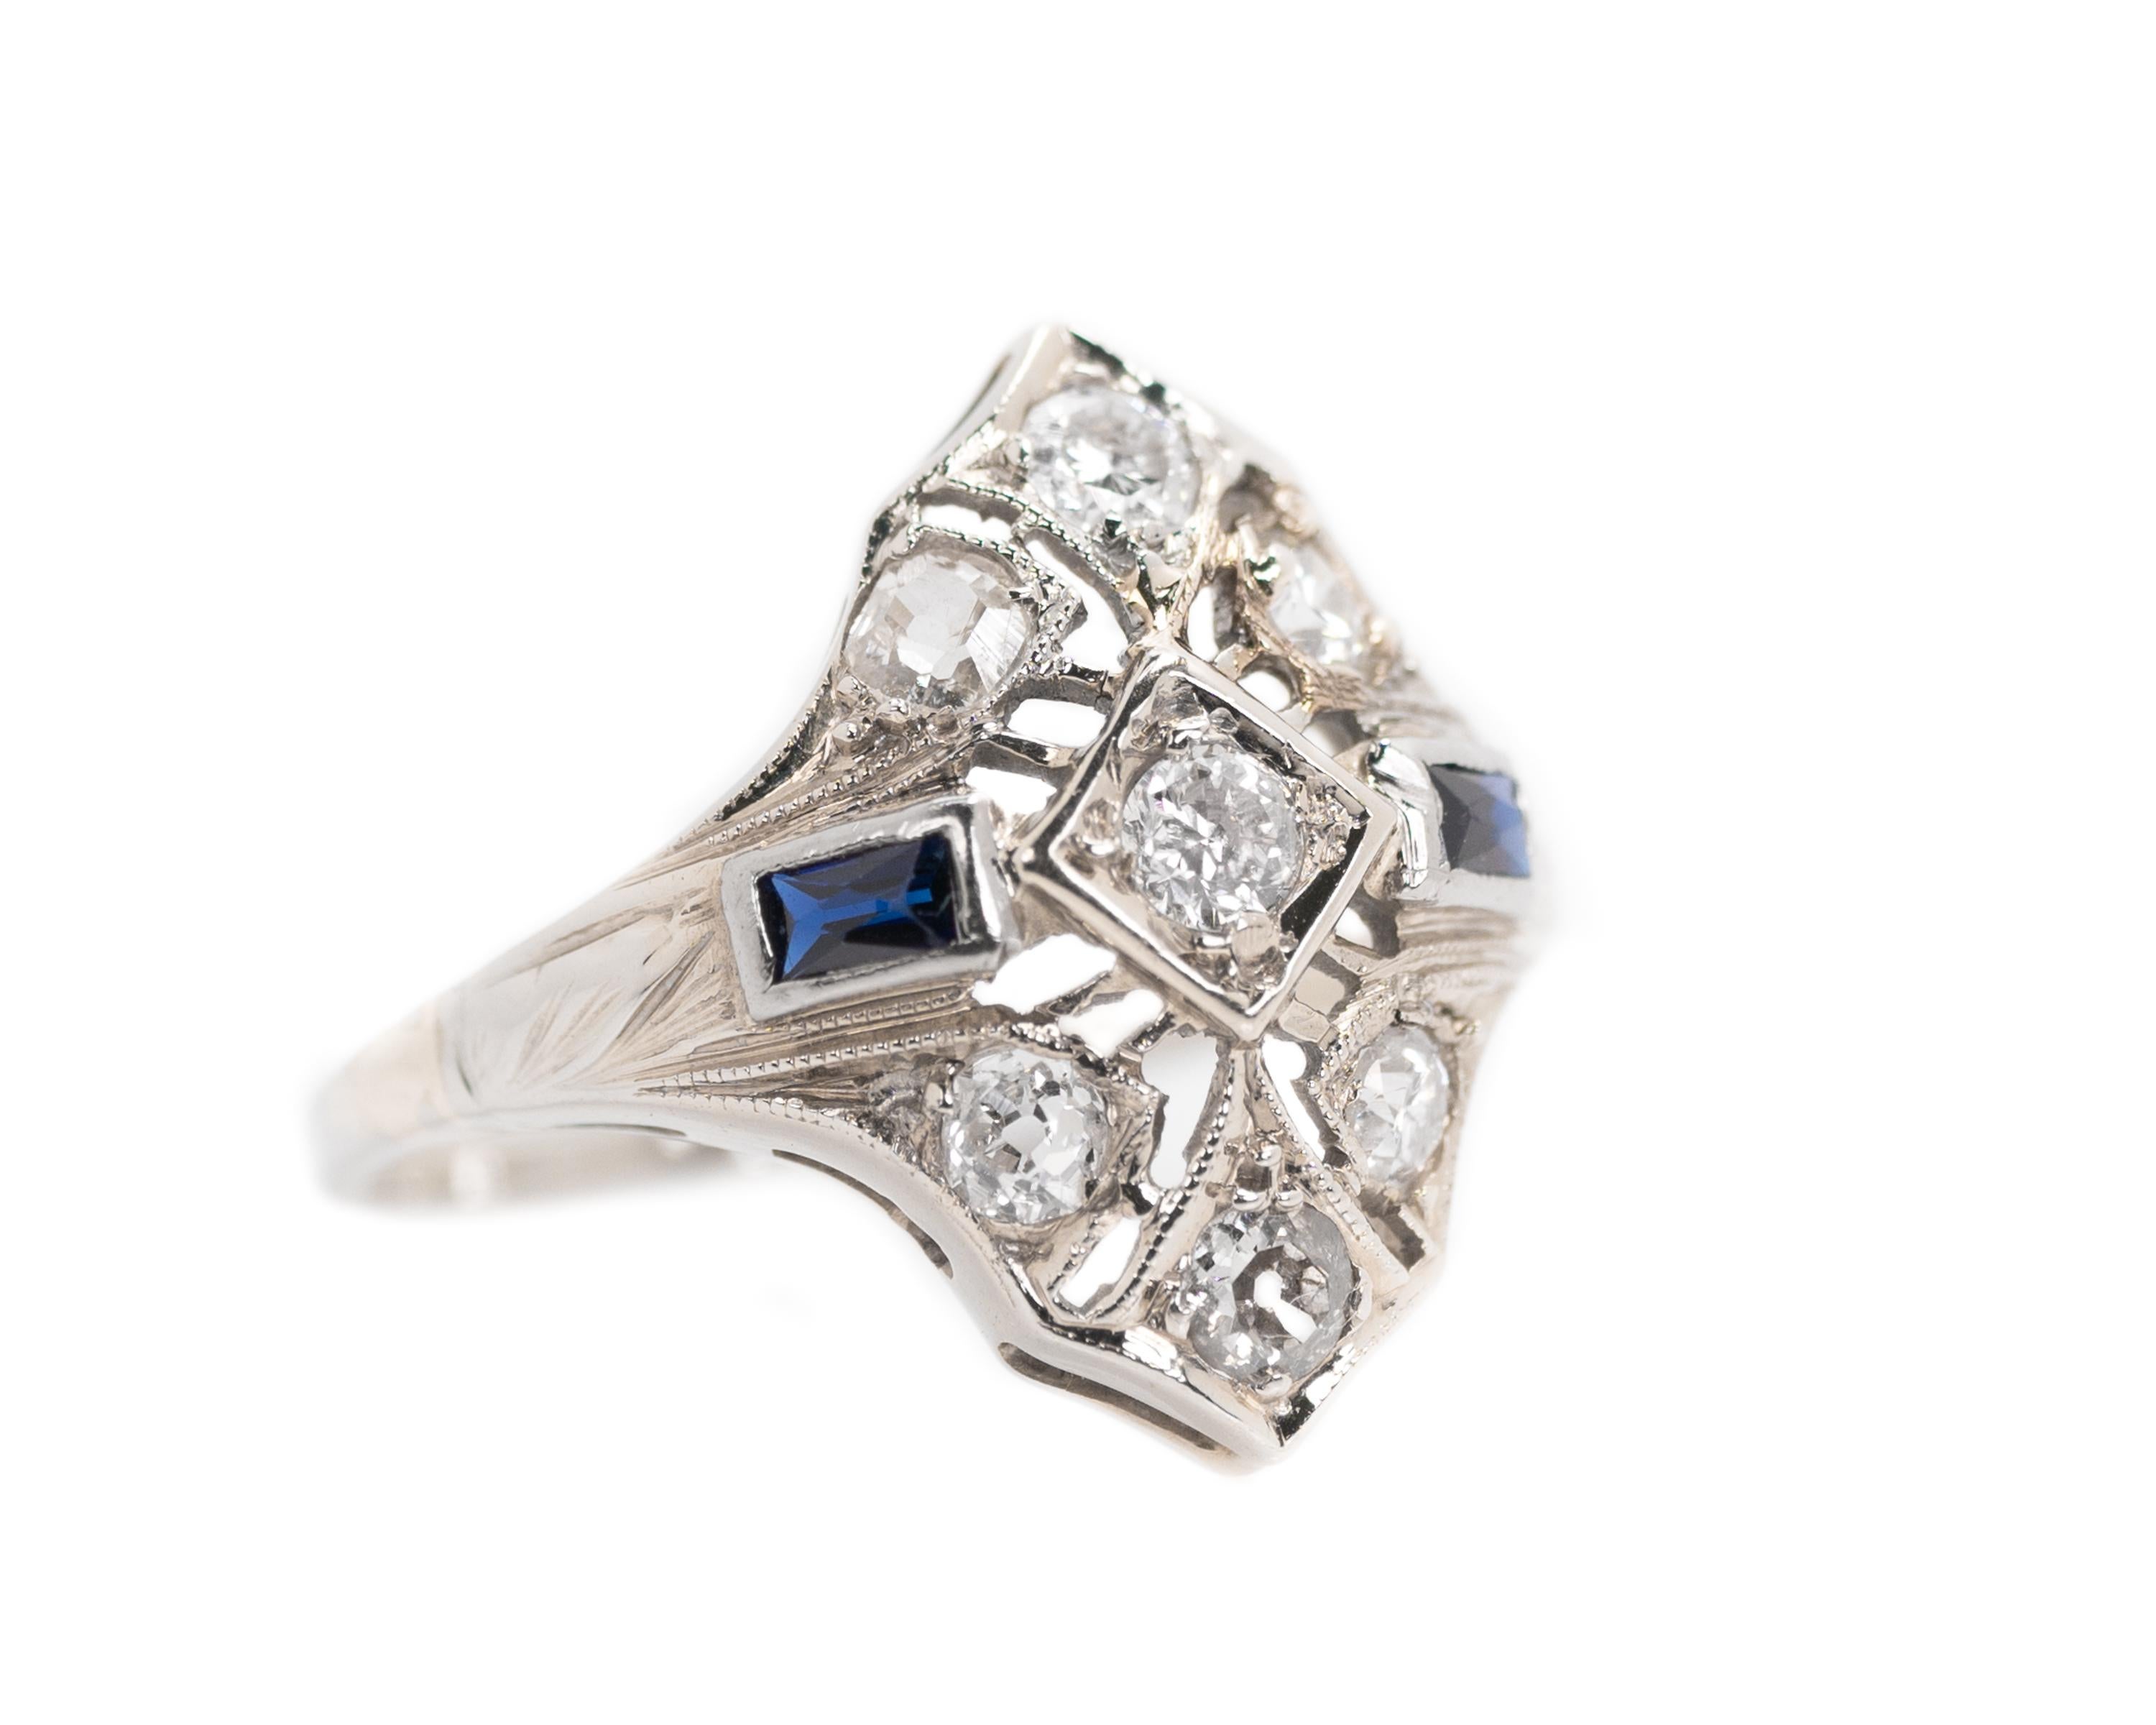 1920s Art Deco Engagement Ring - Platinum, Old Mine Diamonds, Blue Sapphires

Features: 
0.25 carat total weight round Old Mine Diamonds
2 French cut Blue Sapphires
Platinum setting with filigree work and an open Gallery 

Ring face measures 17